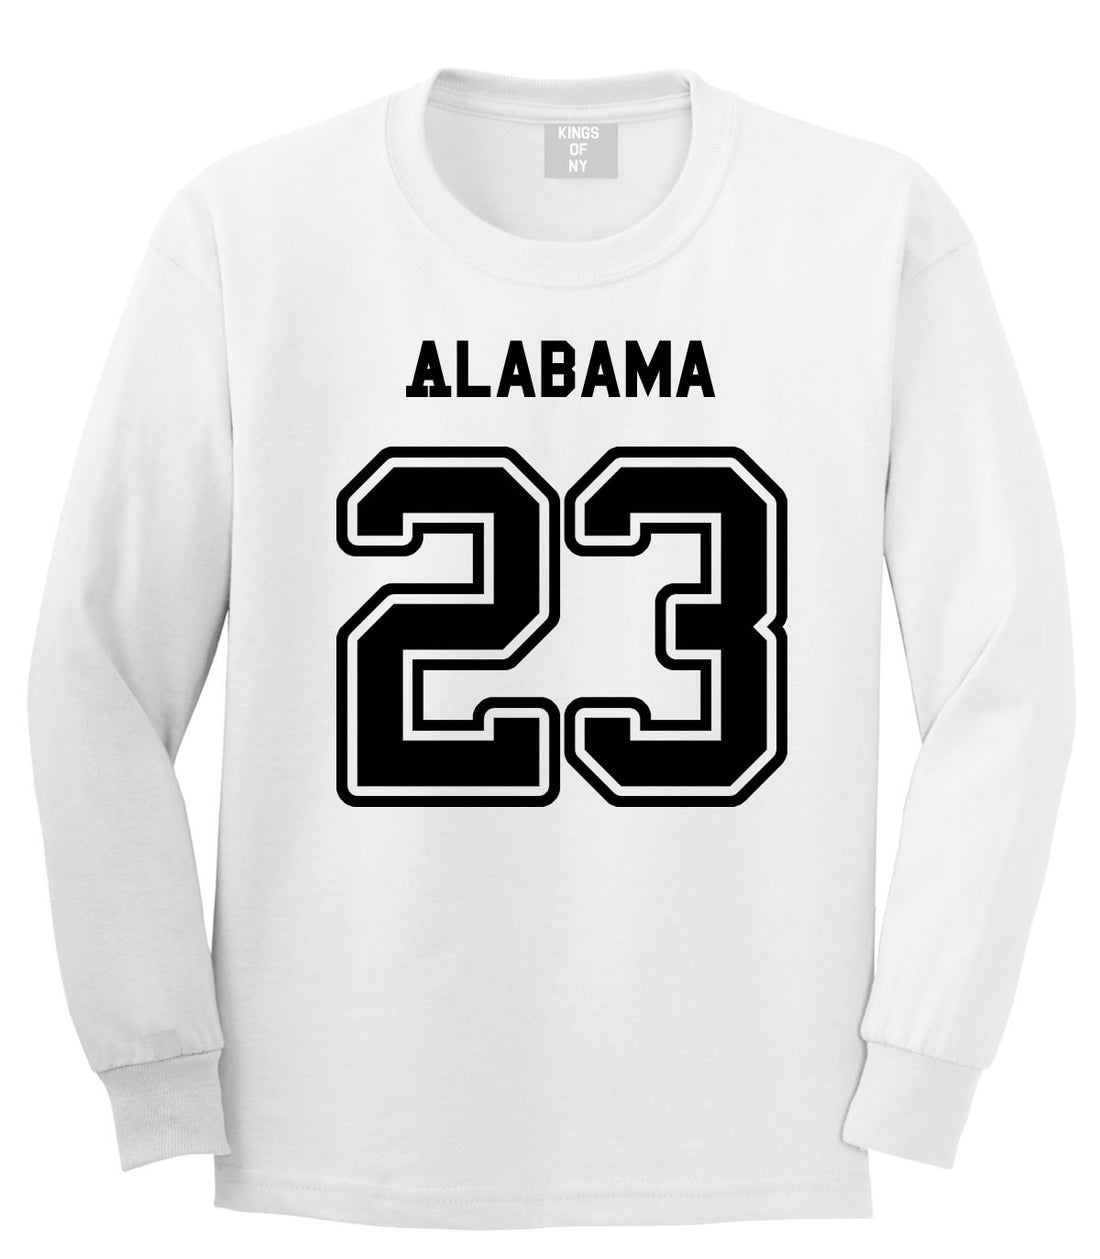 Sport Style Alabama 23 Team State Jersey Long Sleeve T-Shirt By Kings Of NY